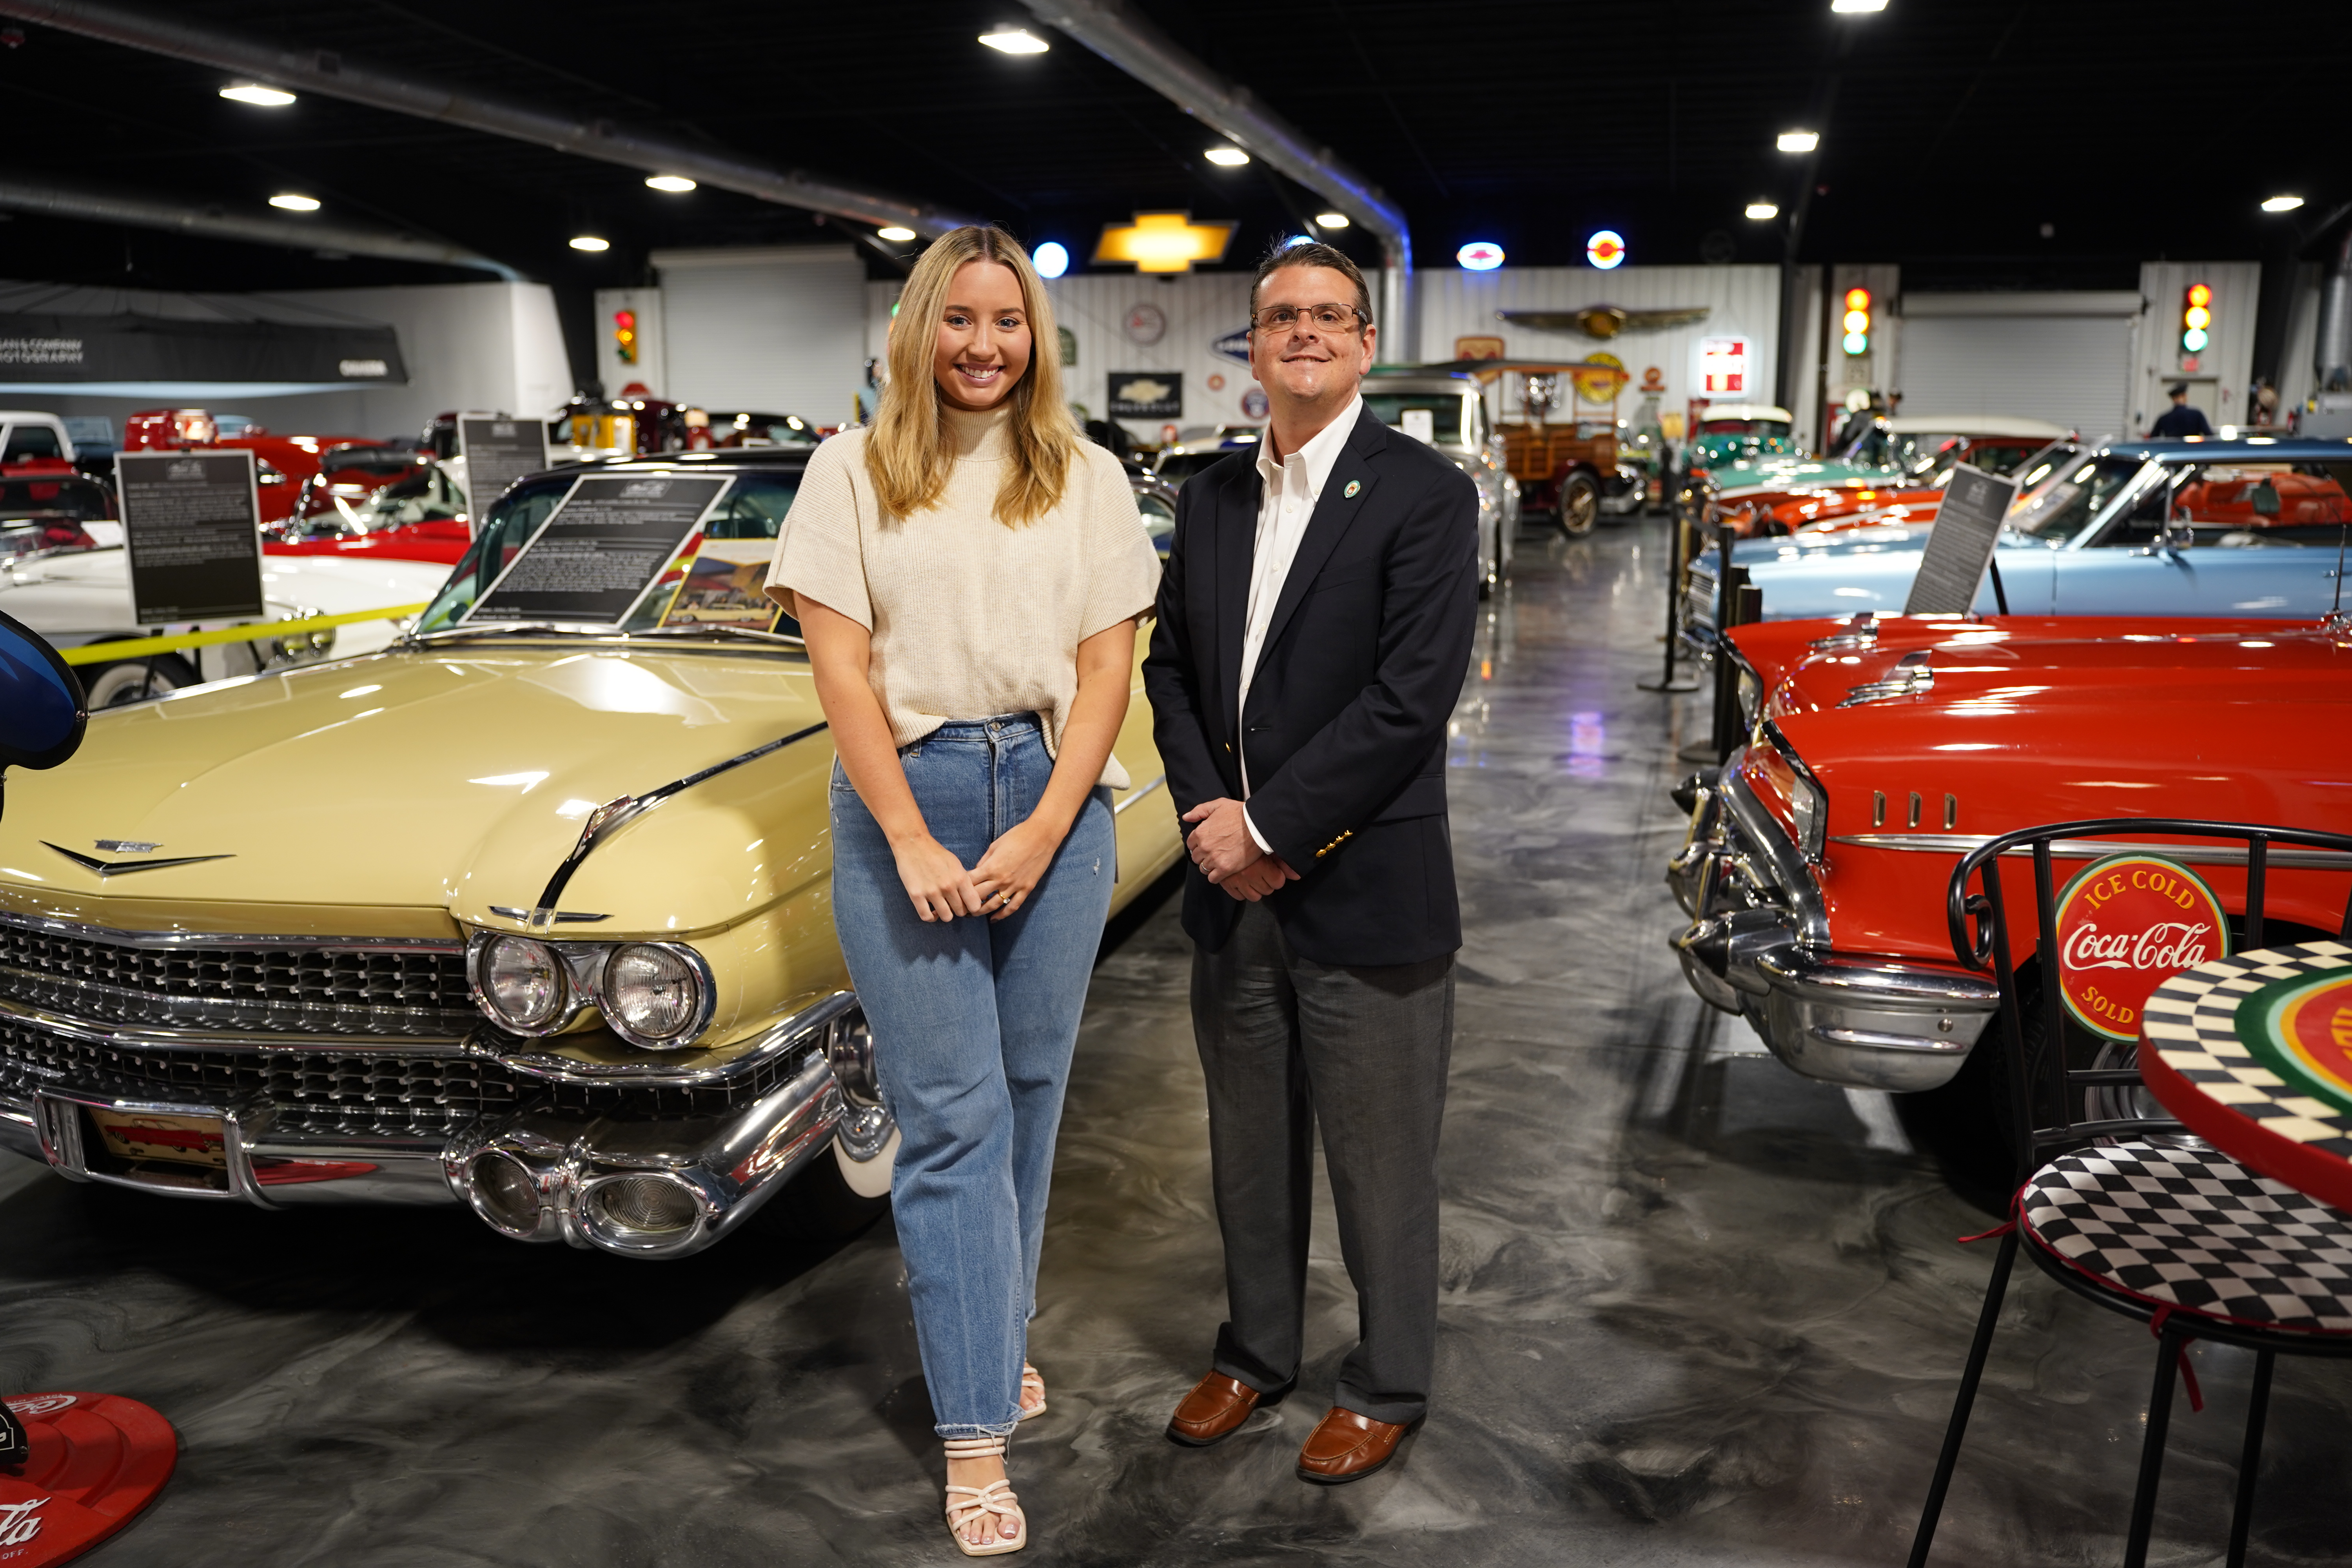 St. Johns County Business Spotlight: Classic Car Museum of St. Augustine